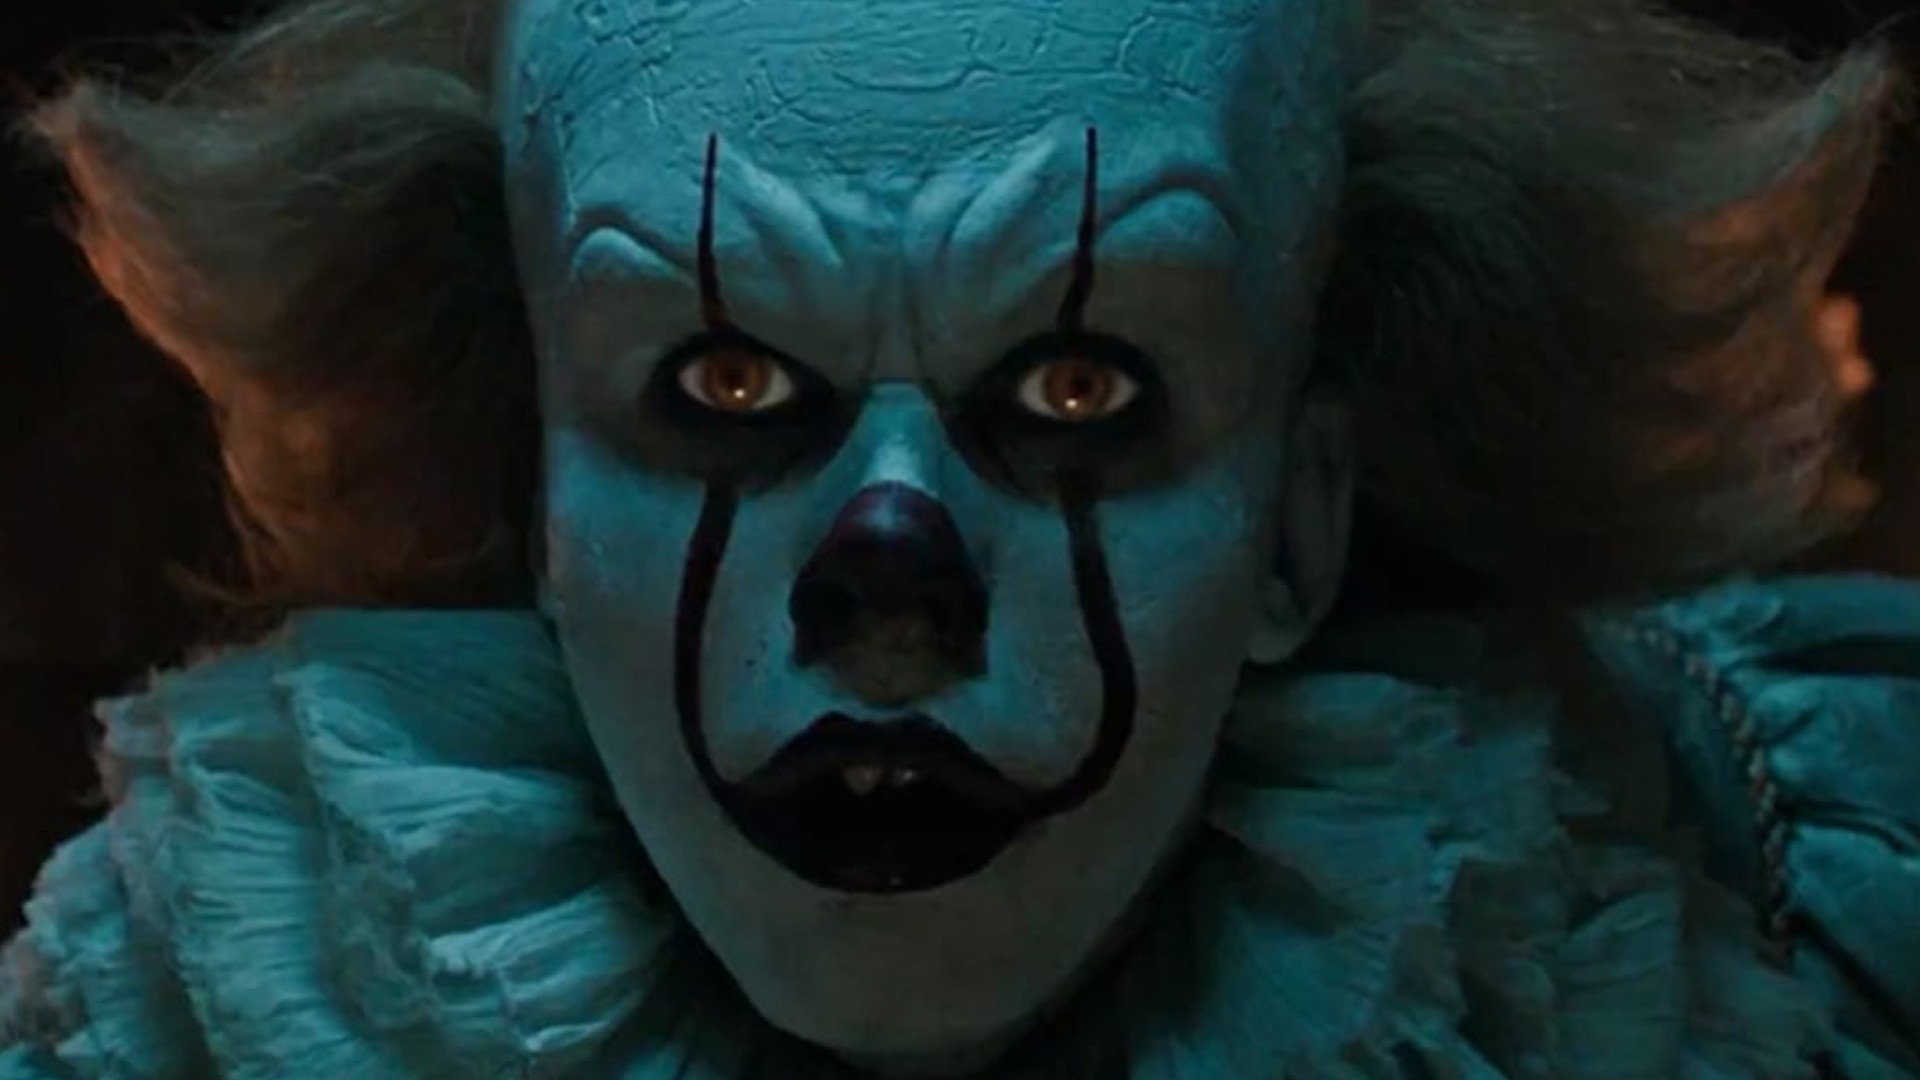 1920x1080 Bill Skarsgard brought Pennywise The Clown to life in the most terrifying  way in the amazing recently feature film adaptation of Stephen King's IT.